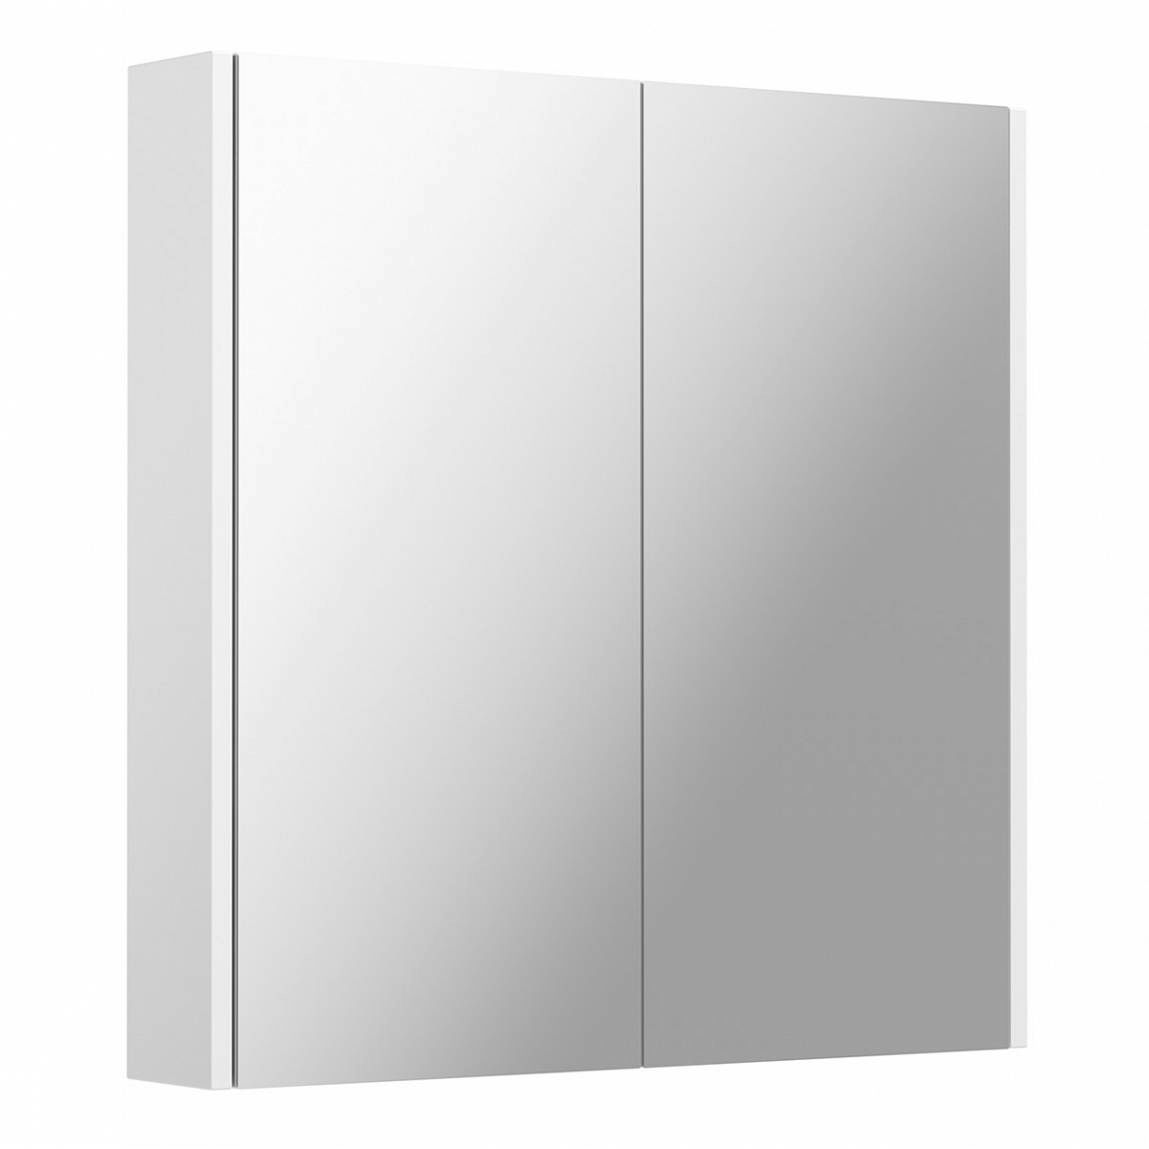 Details about   600mm Bathroom Mirror Cabinet 2 Door Storage Cupboard Wall Hung Grey Traditional 